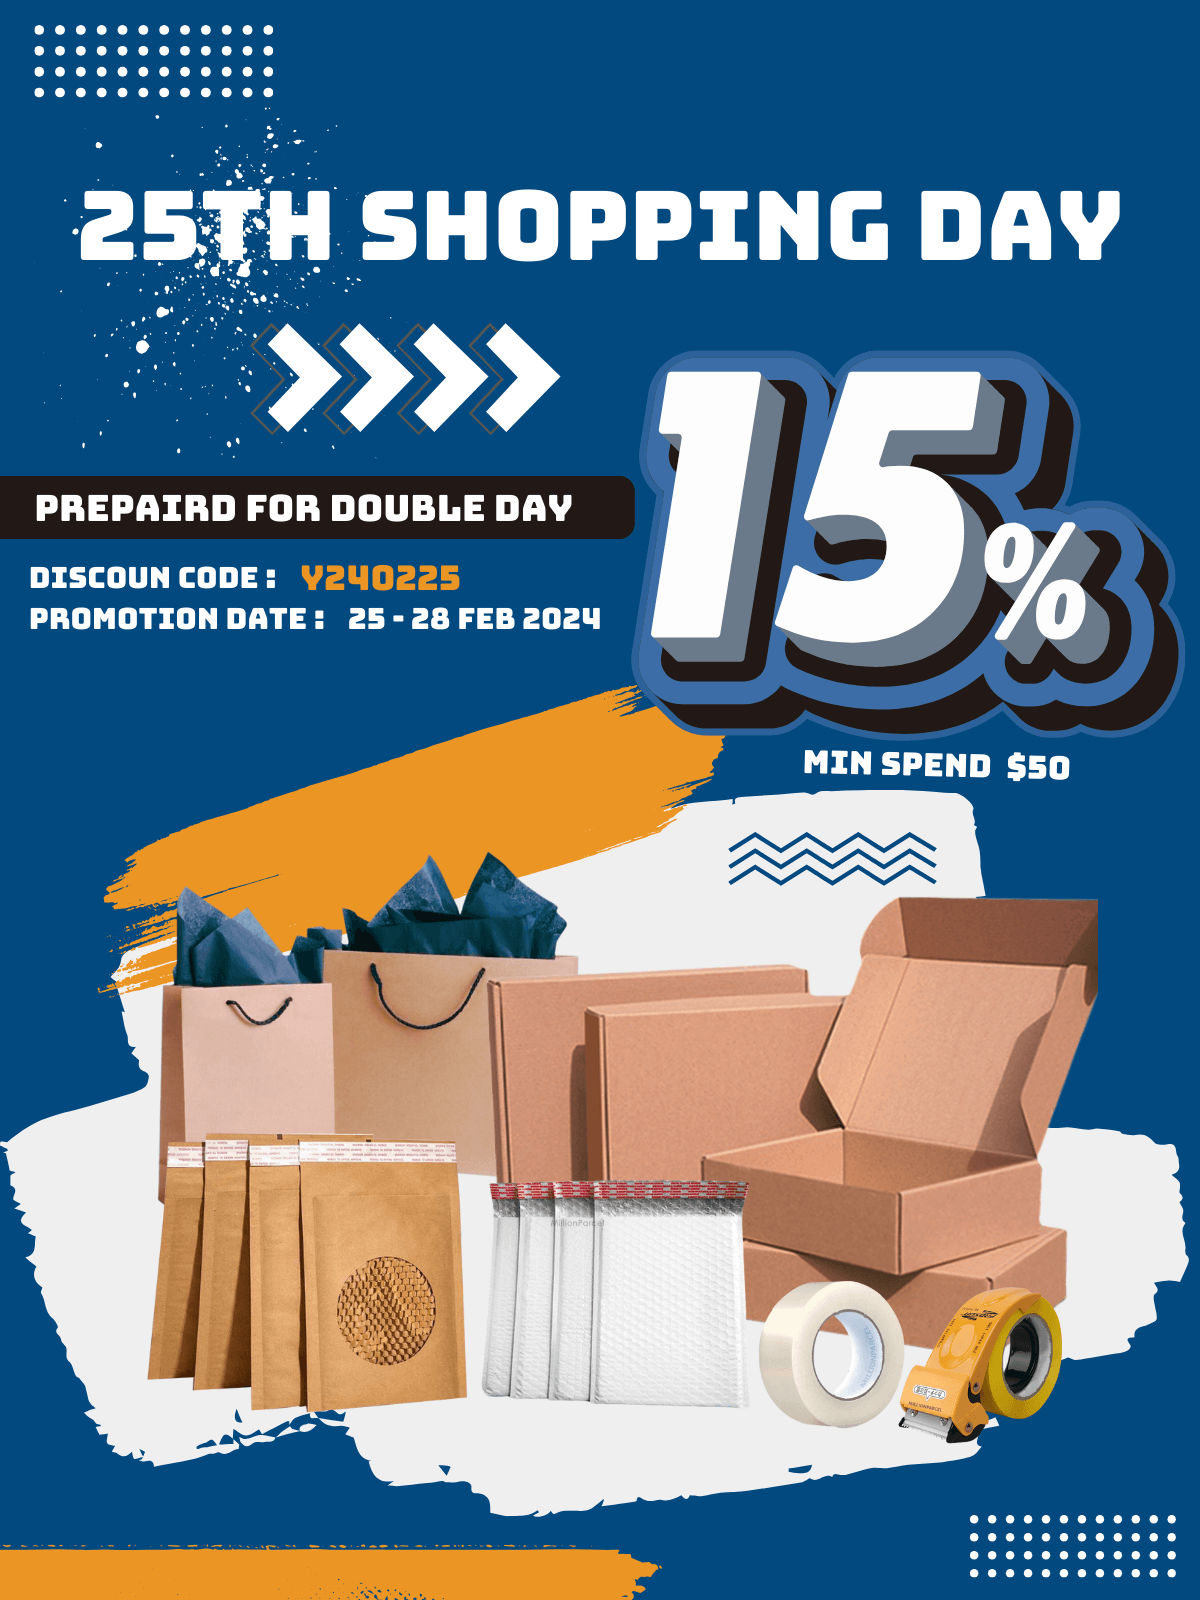 💵 Unlock 15% Savings on Your 25th Shopping Day😃